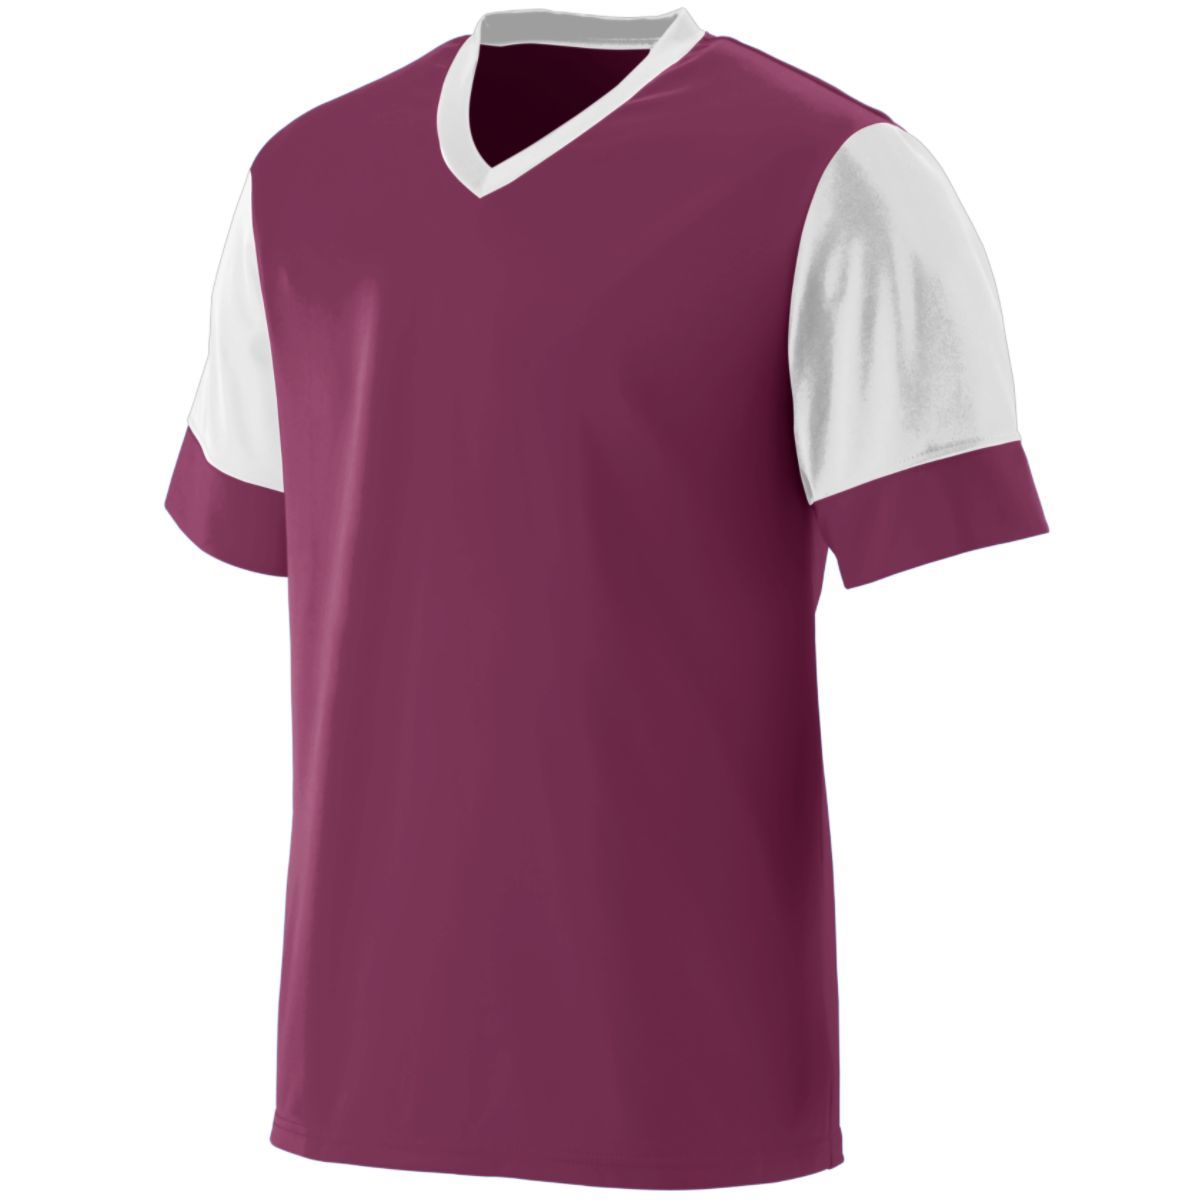 Augusta Sportswear Youth Lightning Jersey in Maroon/White  -Part of the Youth, Youth-Jersey, Augusta-Products, Soccer, Shirts, All-Sports-1 product lines at KanaleyCreations.com